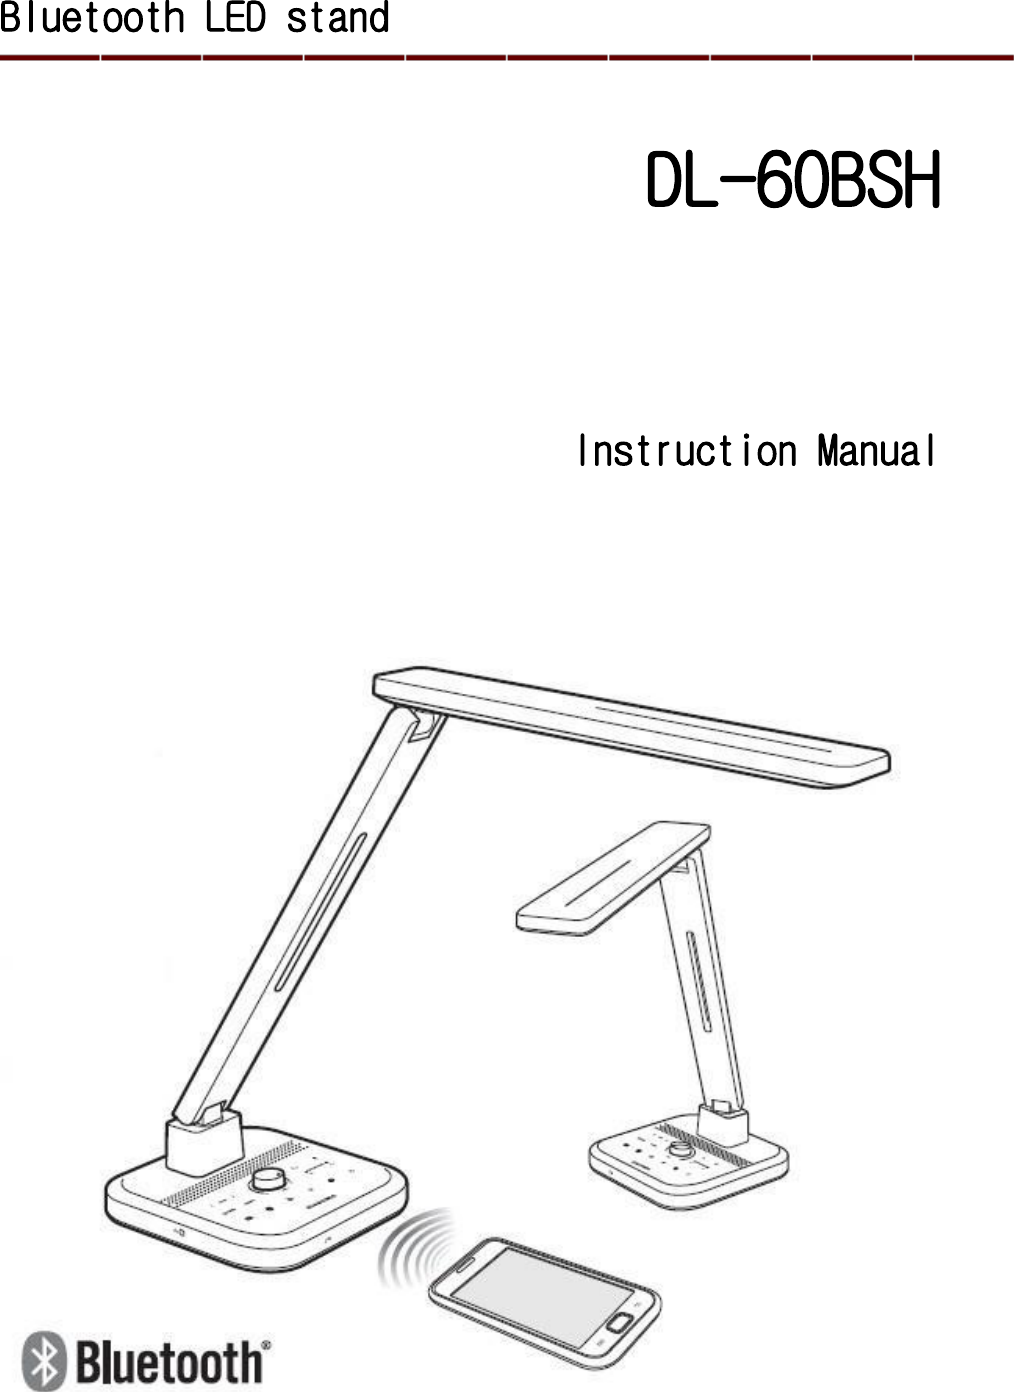 Bluetooth LED stand  DL-60BSH Instruction Manual    